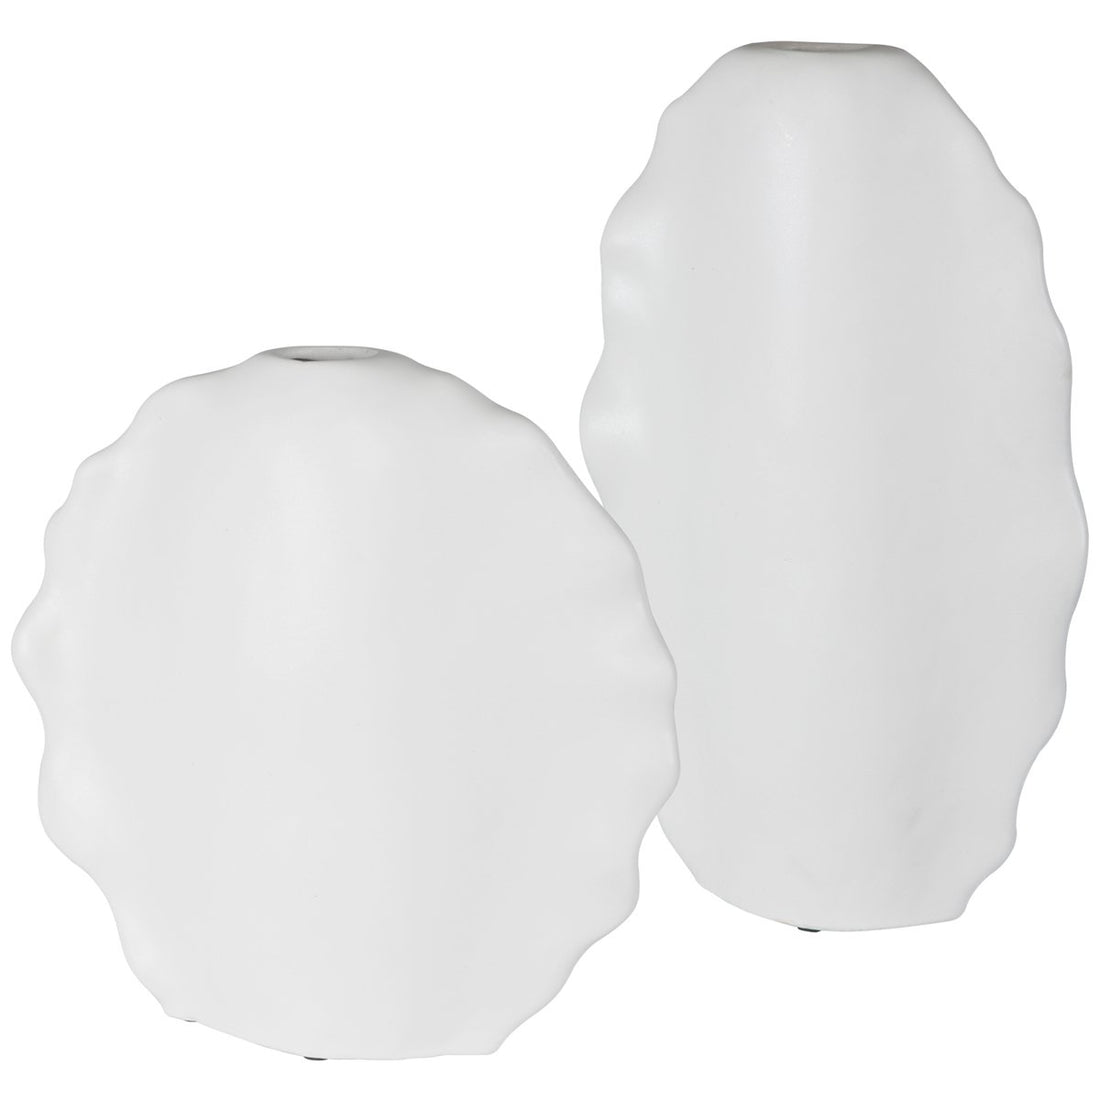 Uttermost Ruffled Feathers Modern White Vases, 2-Piece Set